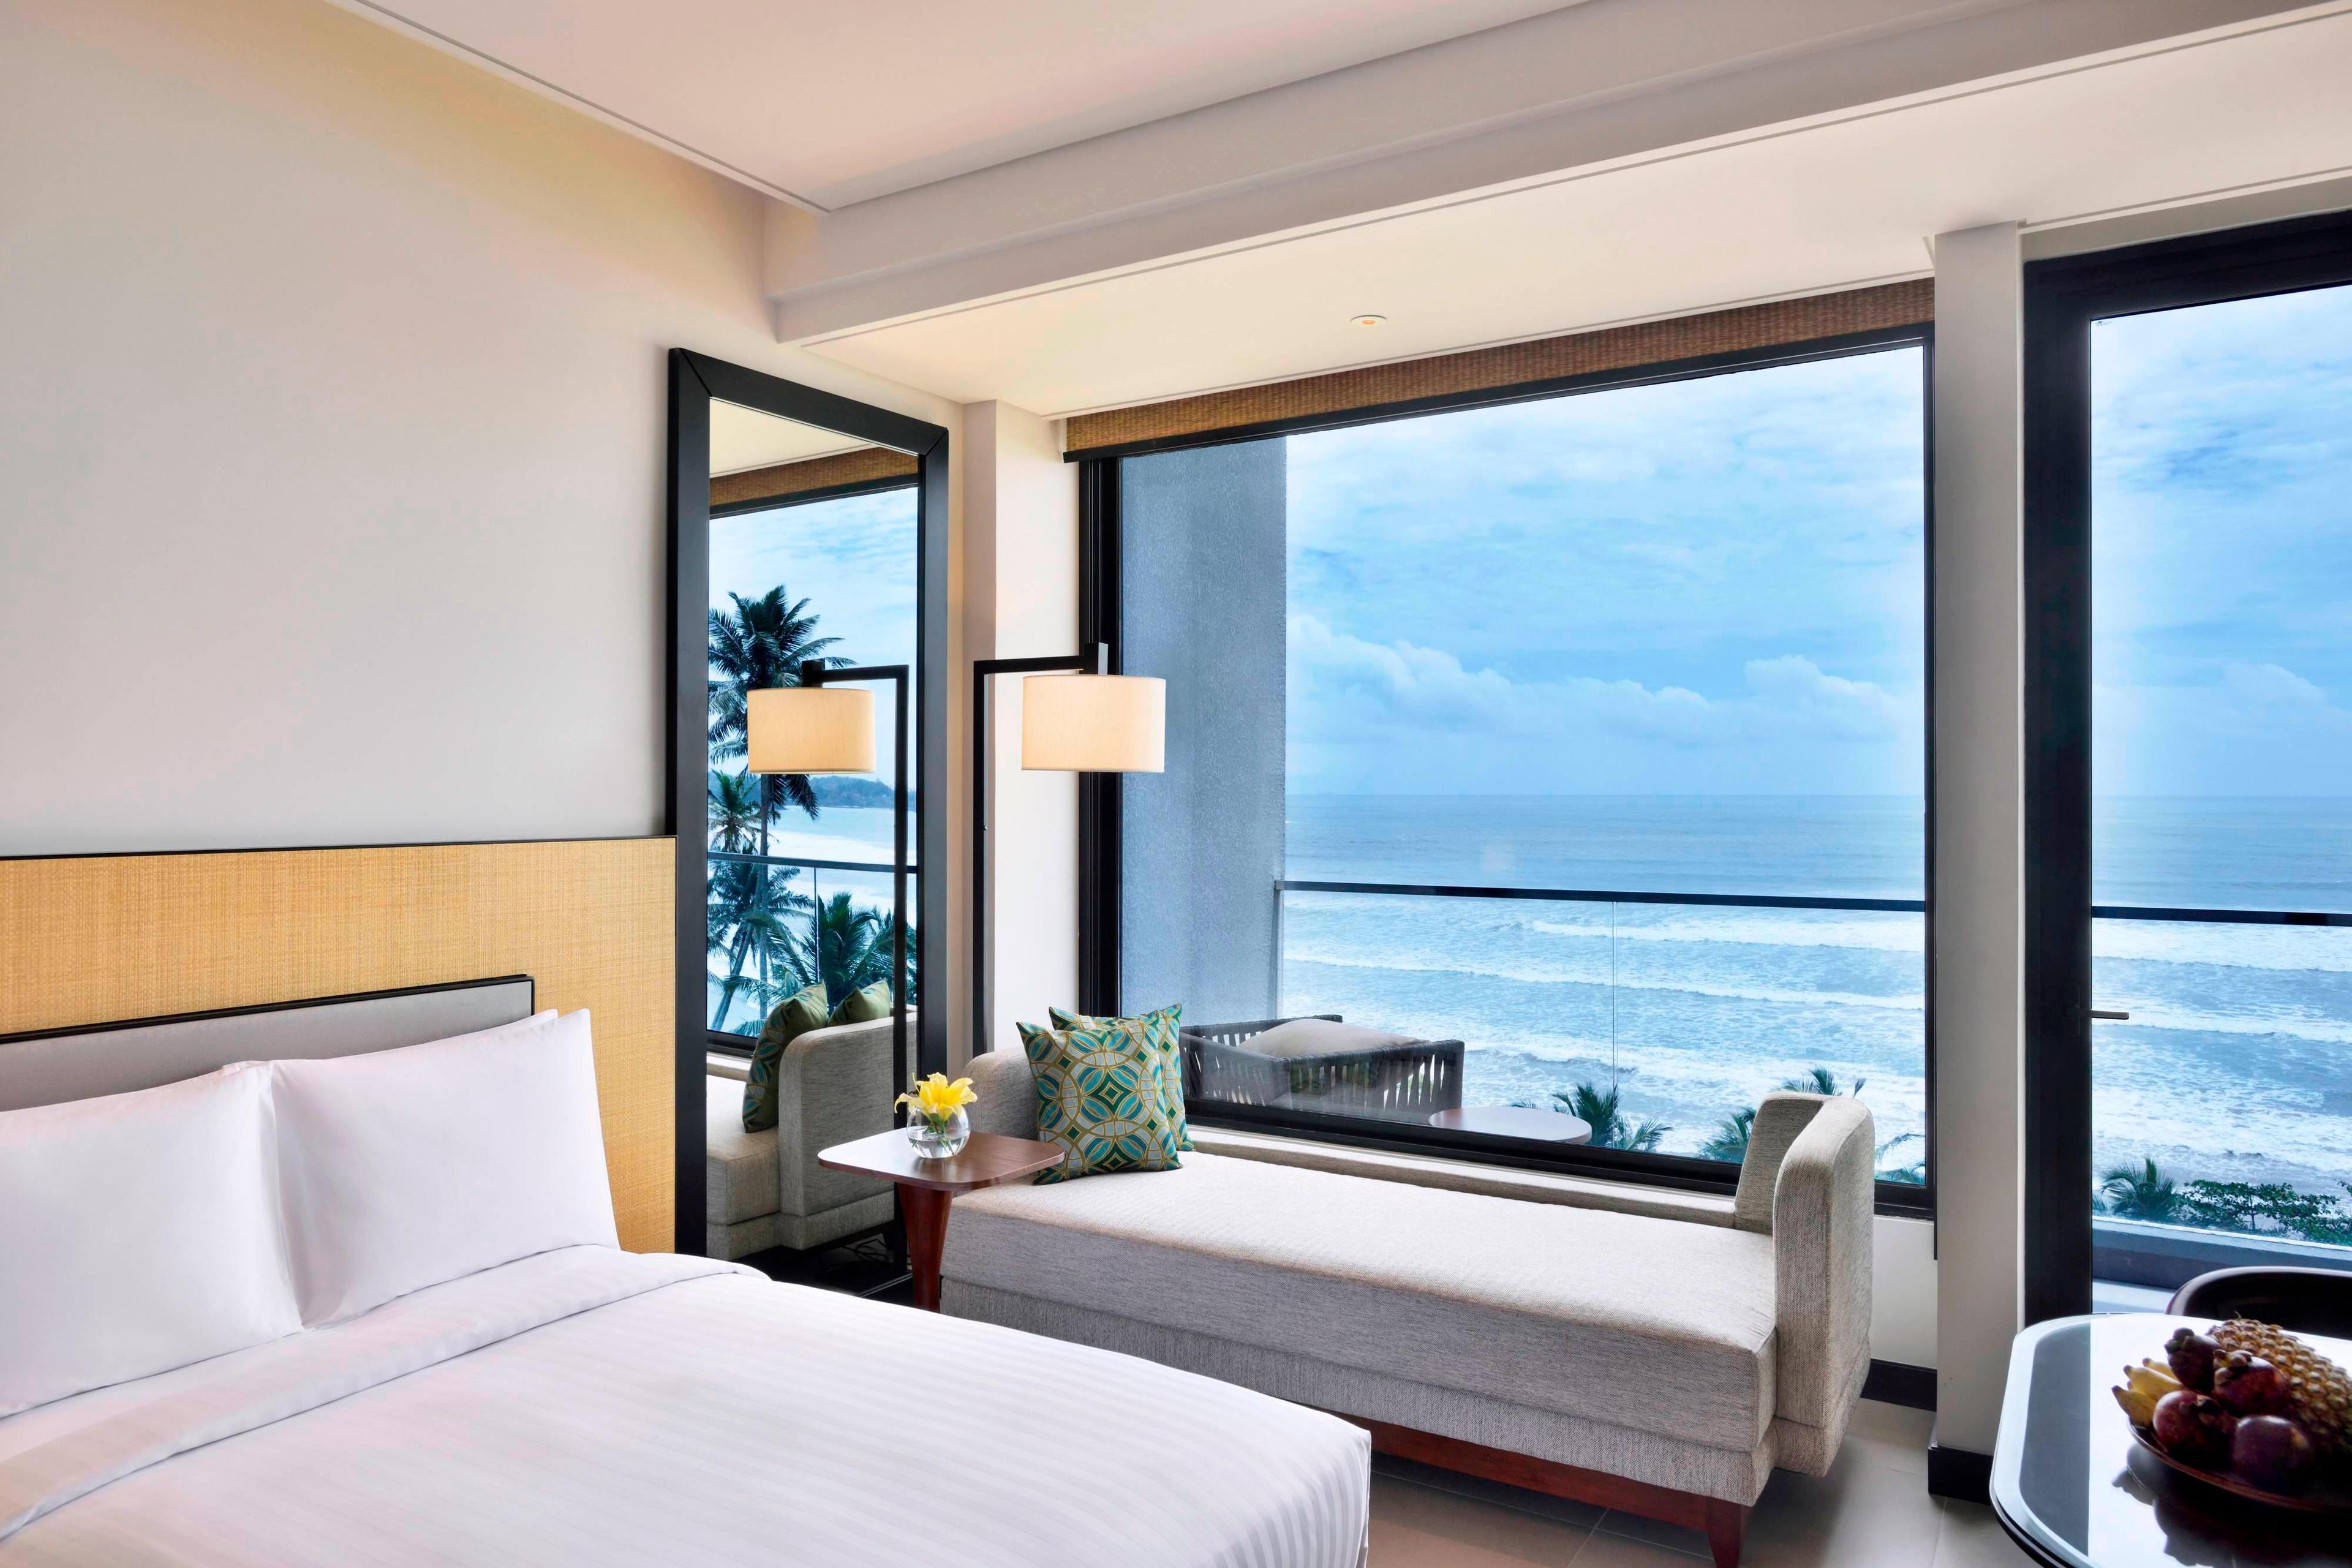 After a day exploring Weligama, unwind on your comfortable mattress as you watch some of the premium TV channels.